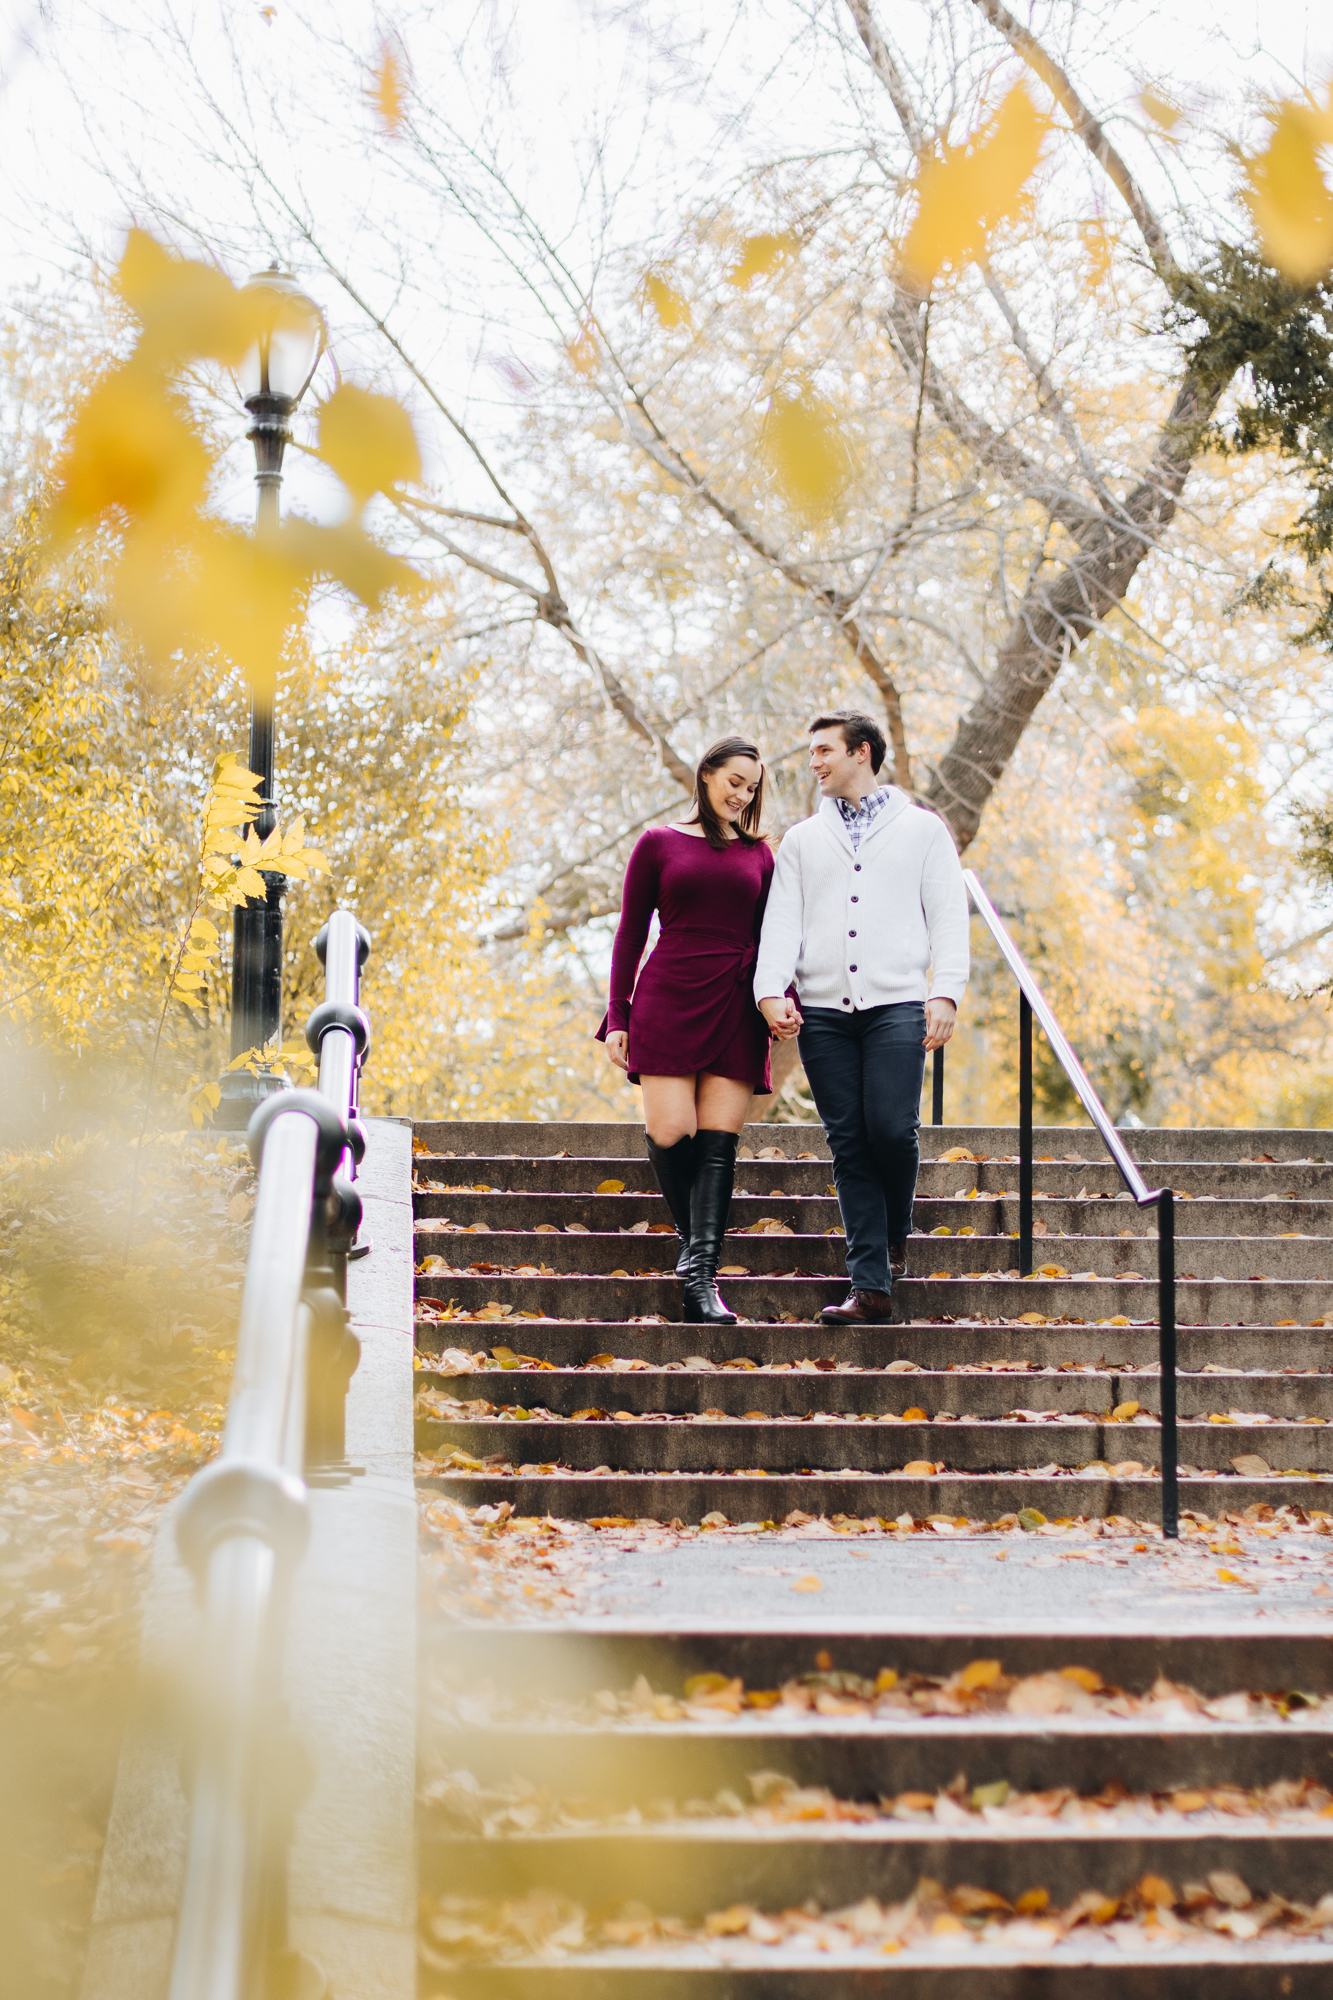 Perfect Fall Engagement Photos in Central Park New York